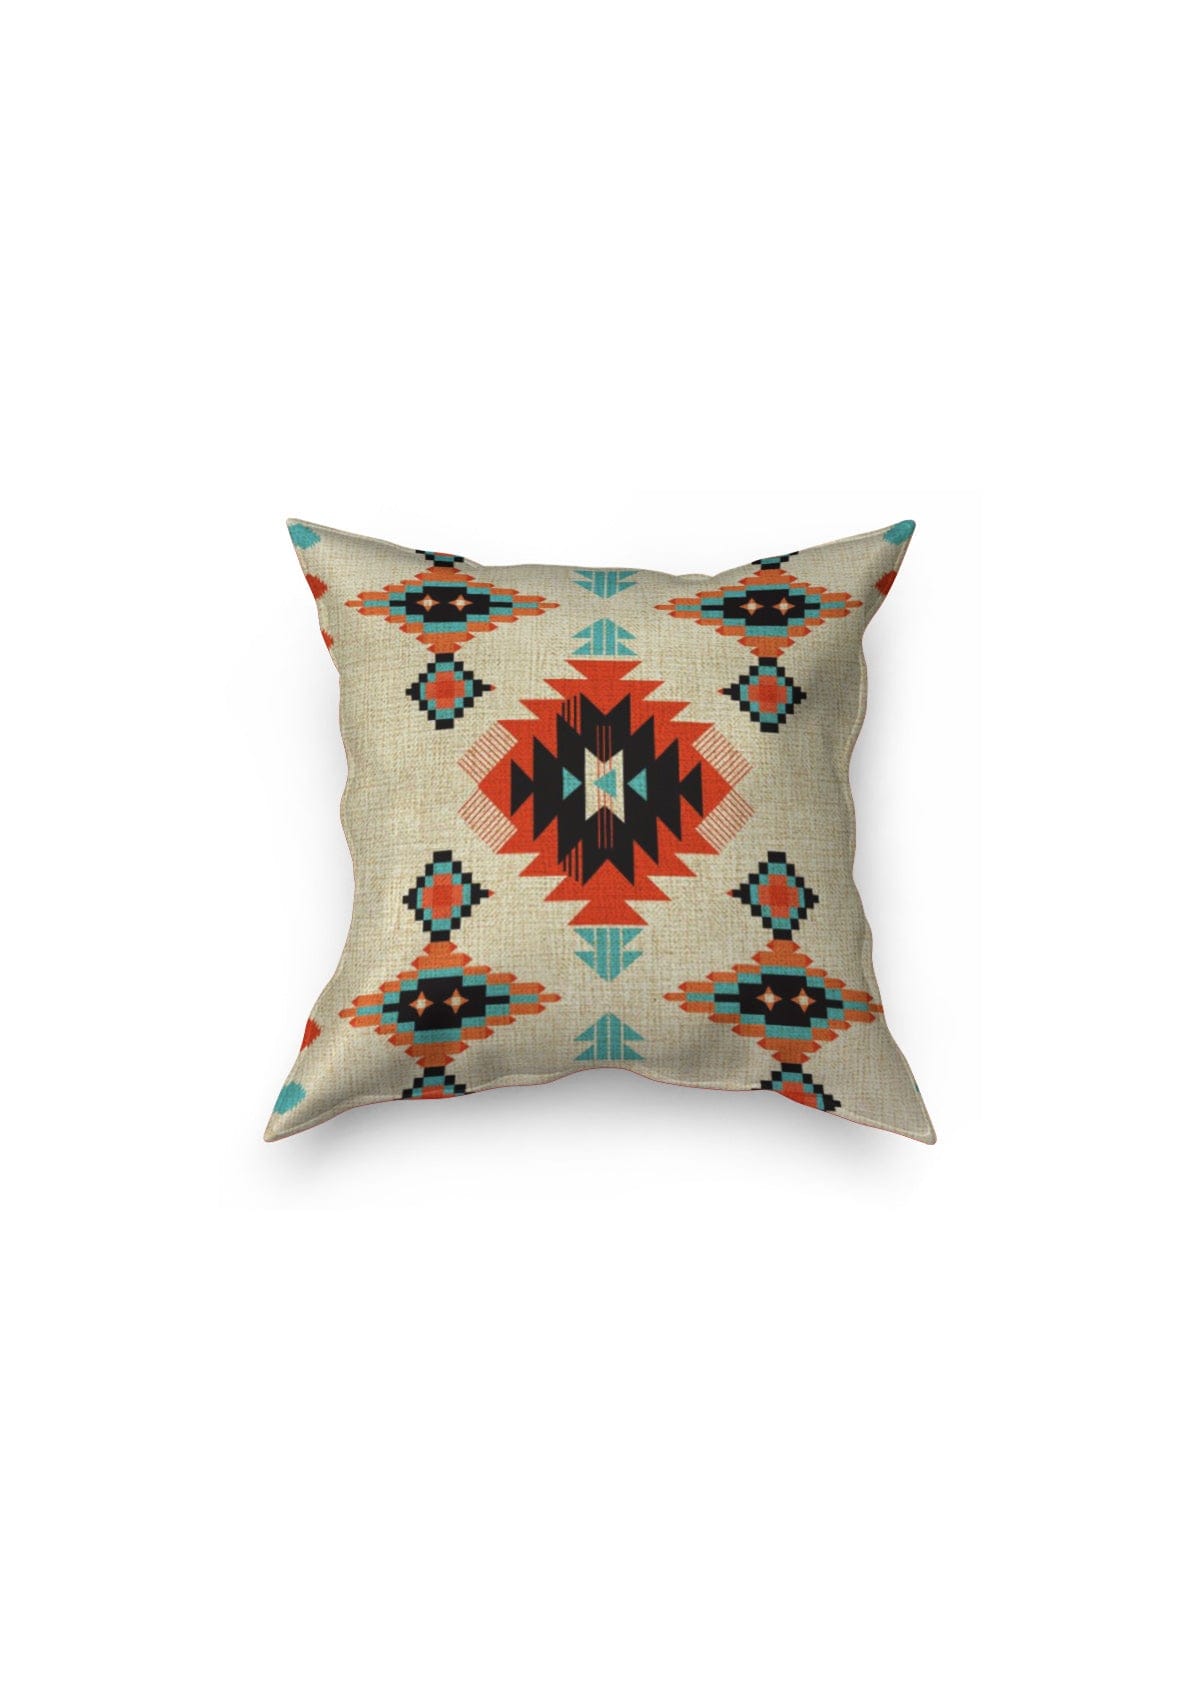 BohoInspiredStyle Cushion Covers | CovermyCushion